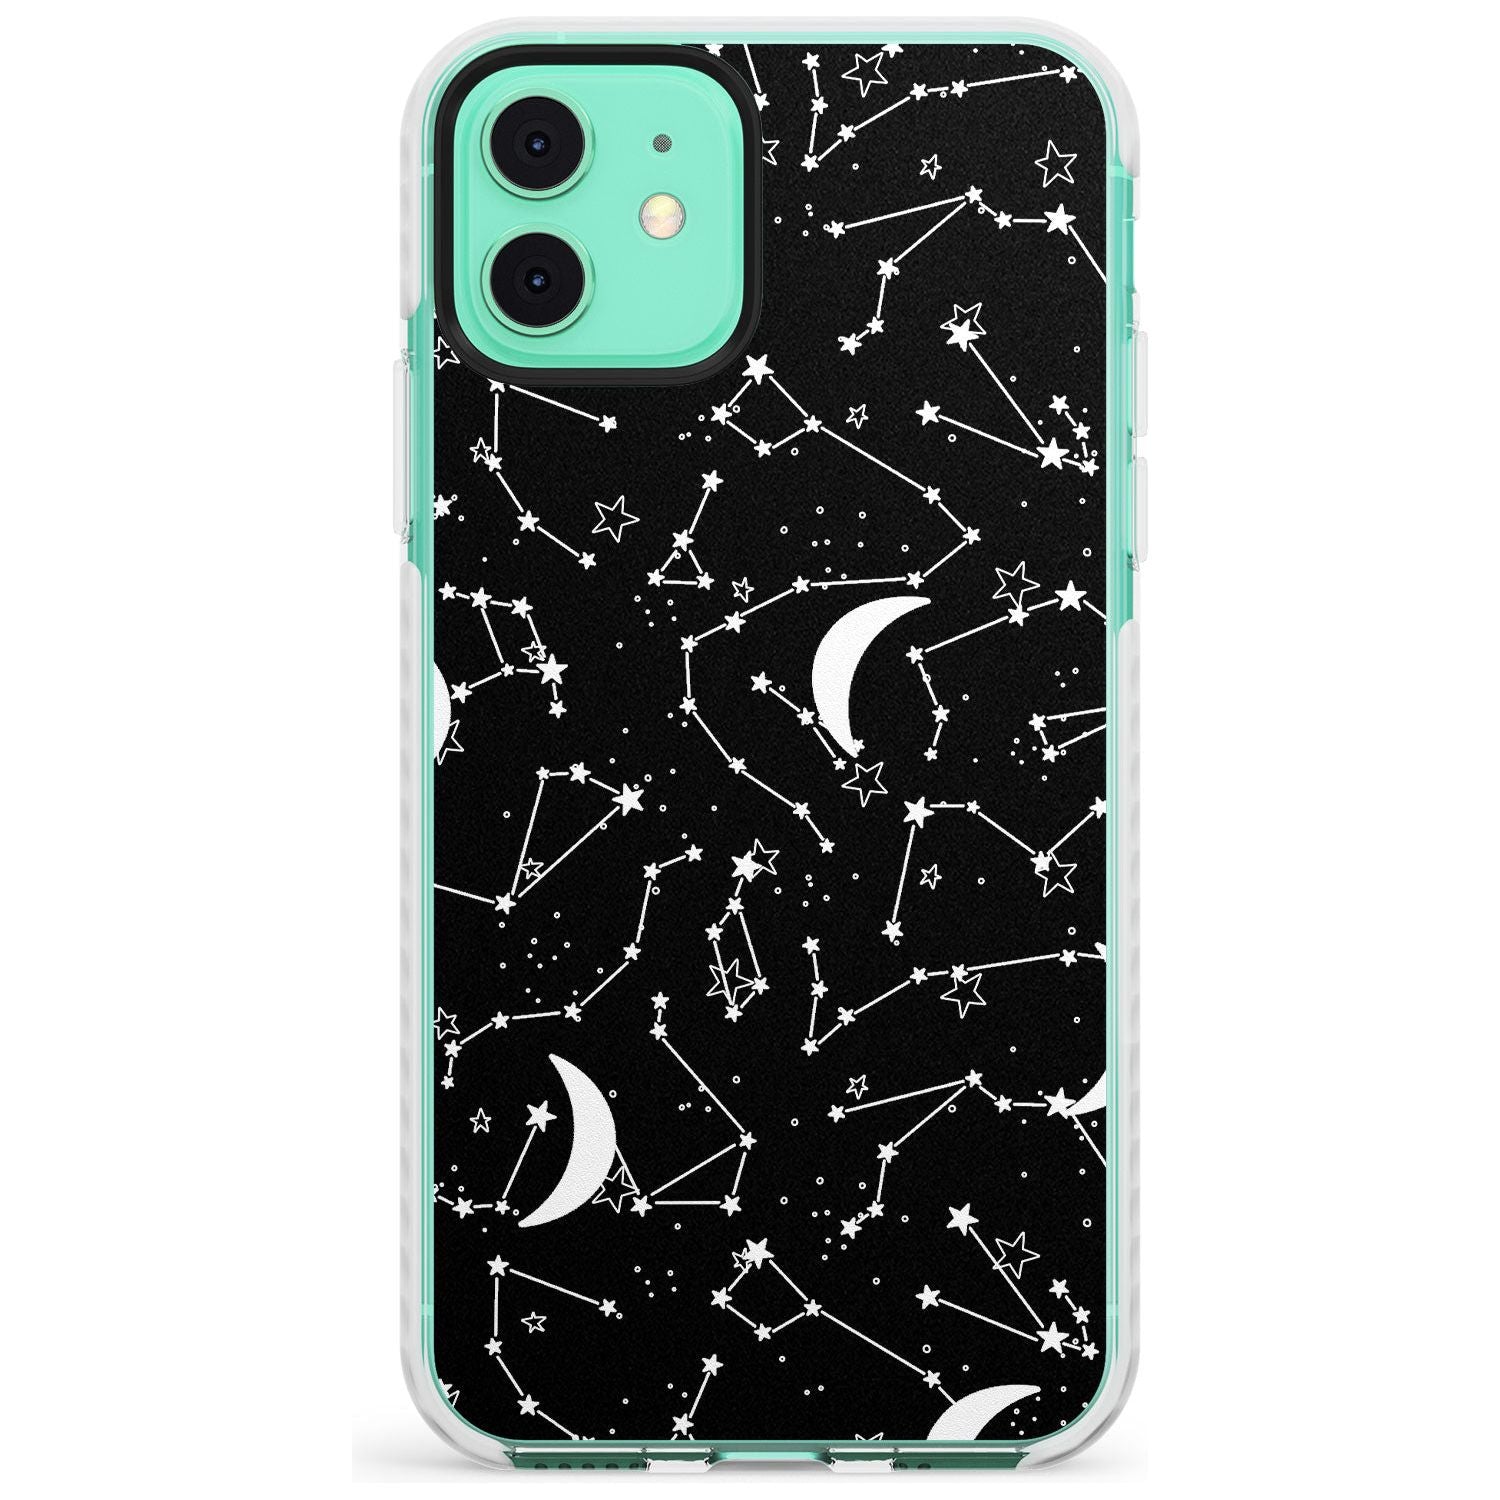 White Constellations on Black Slim TPU Phone Case for iPhone 11